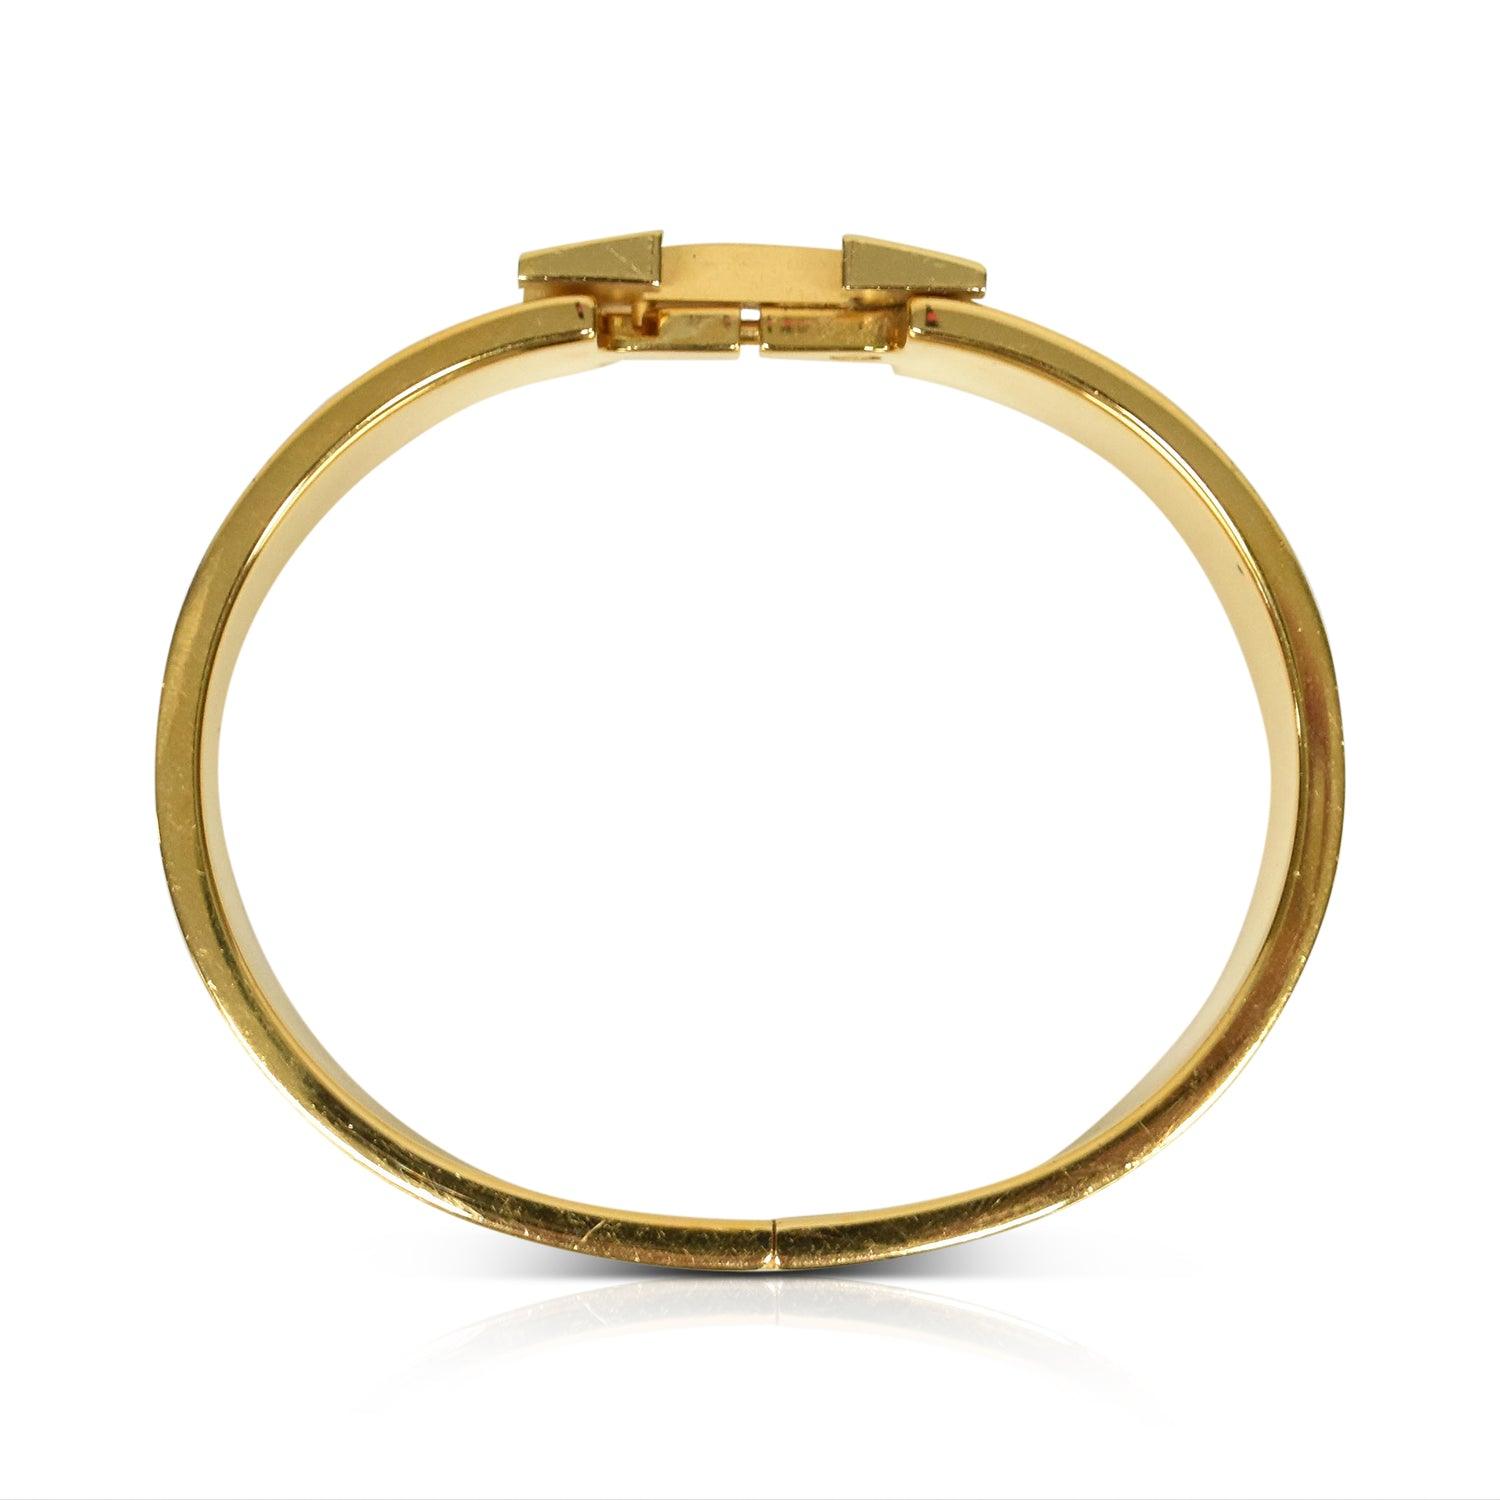 Hermes ‘Clic Clac H’ Bracelet - PM - Fashionably Yours